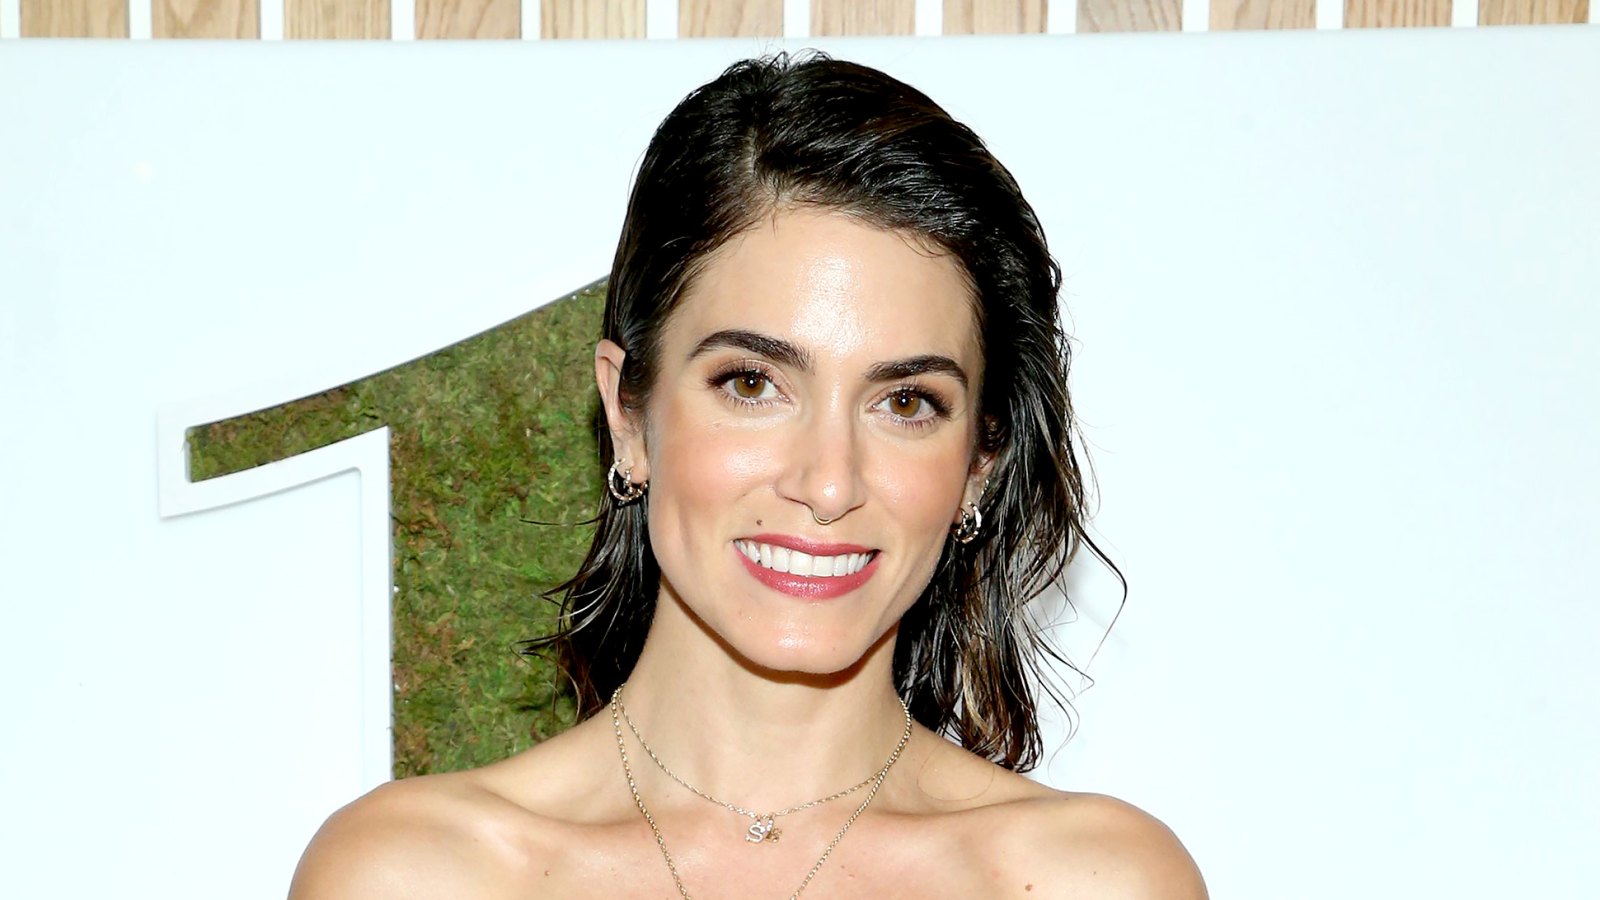 Nikki Reed Posts About Taking ‘Time Off’ Ahead of New Year